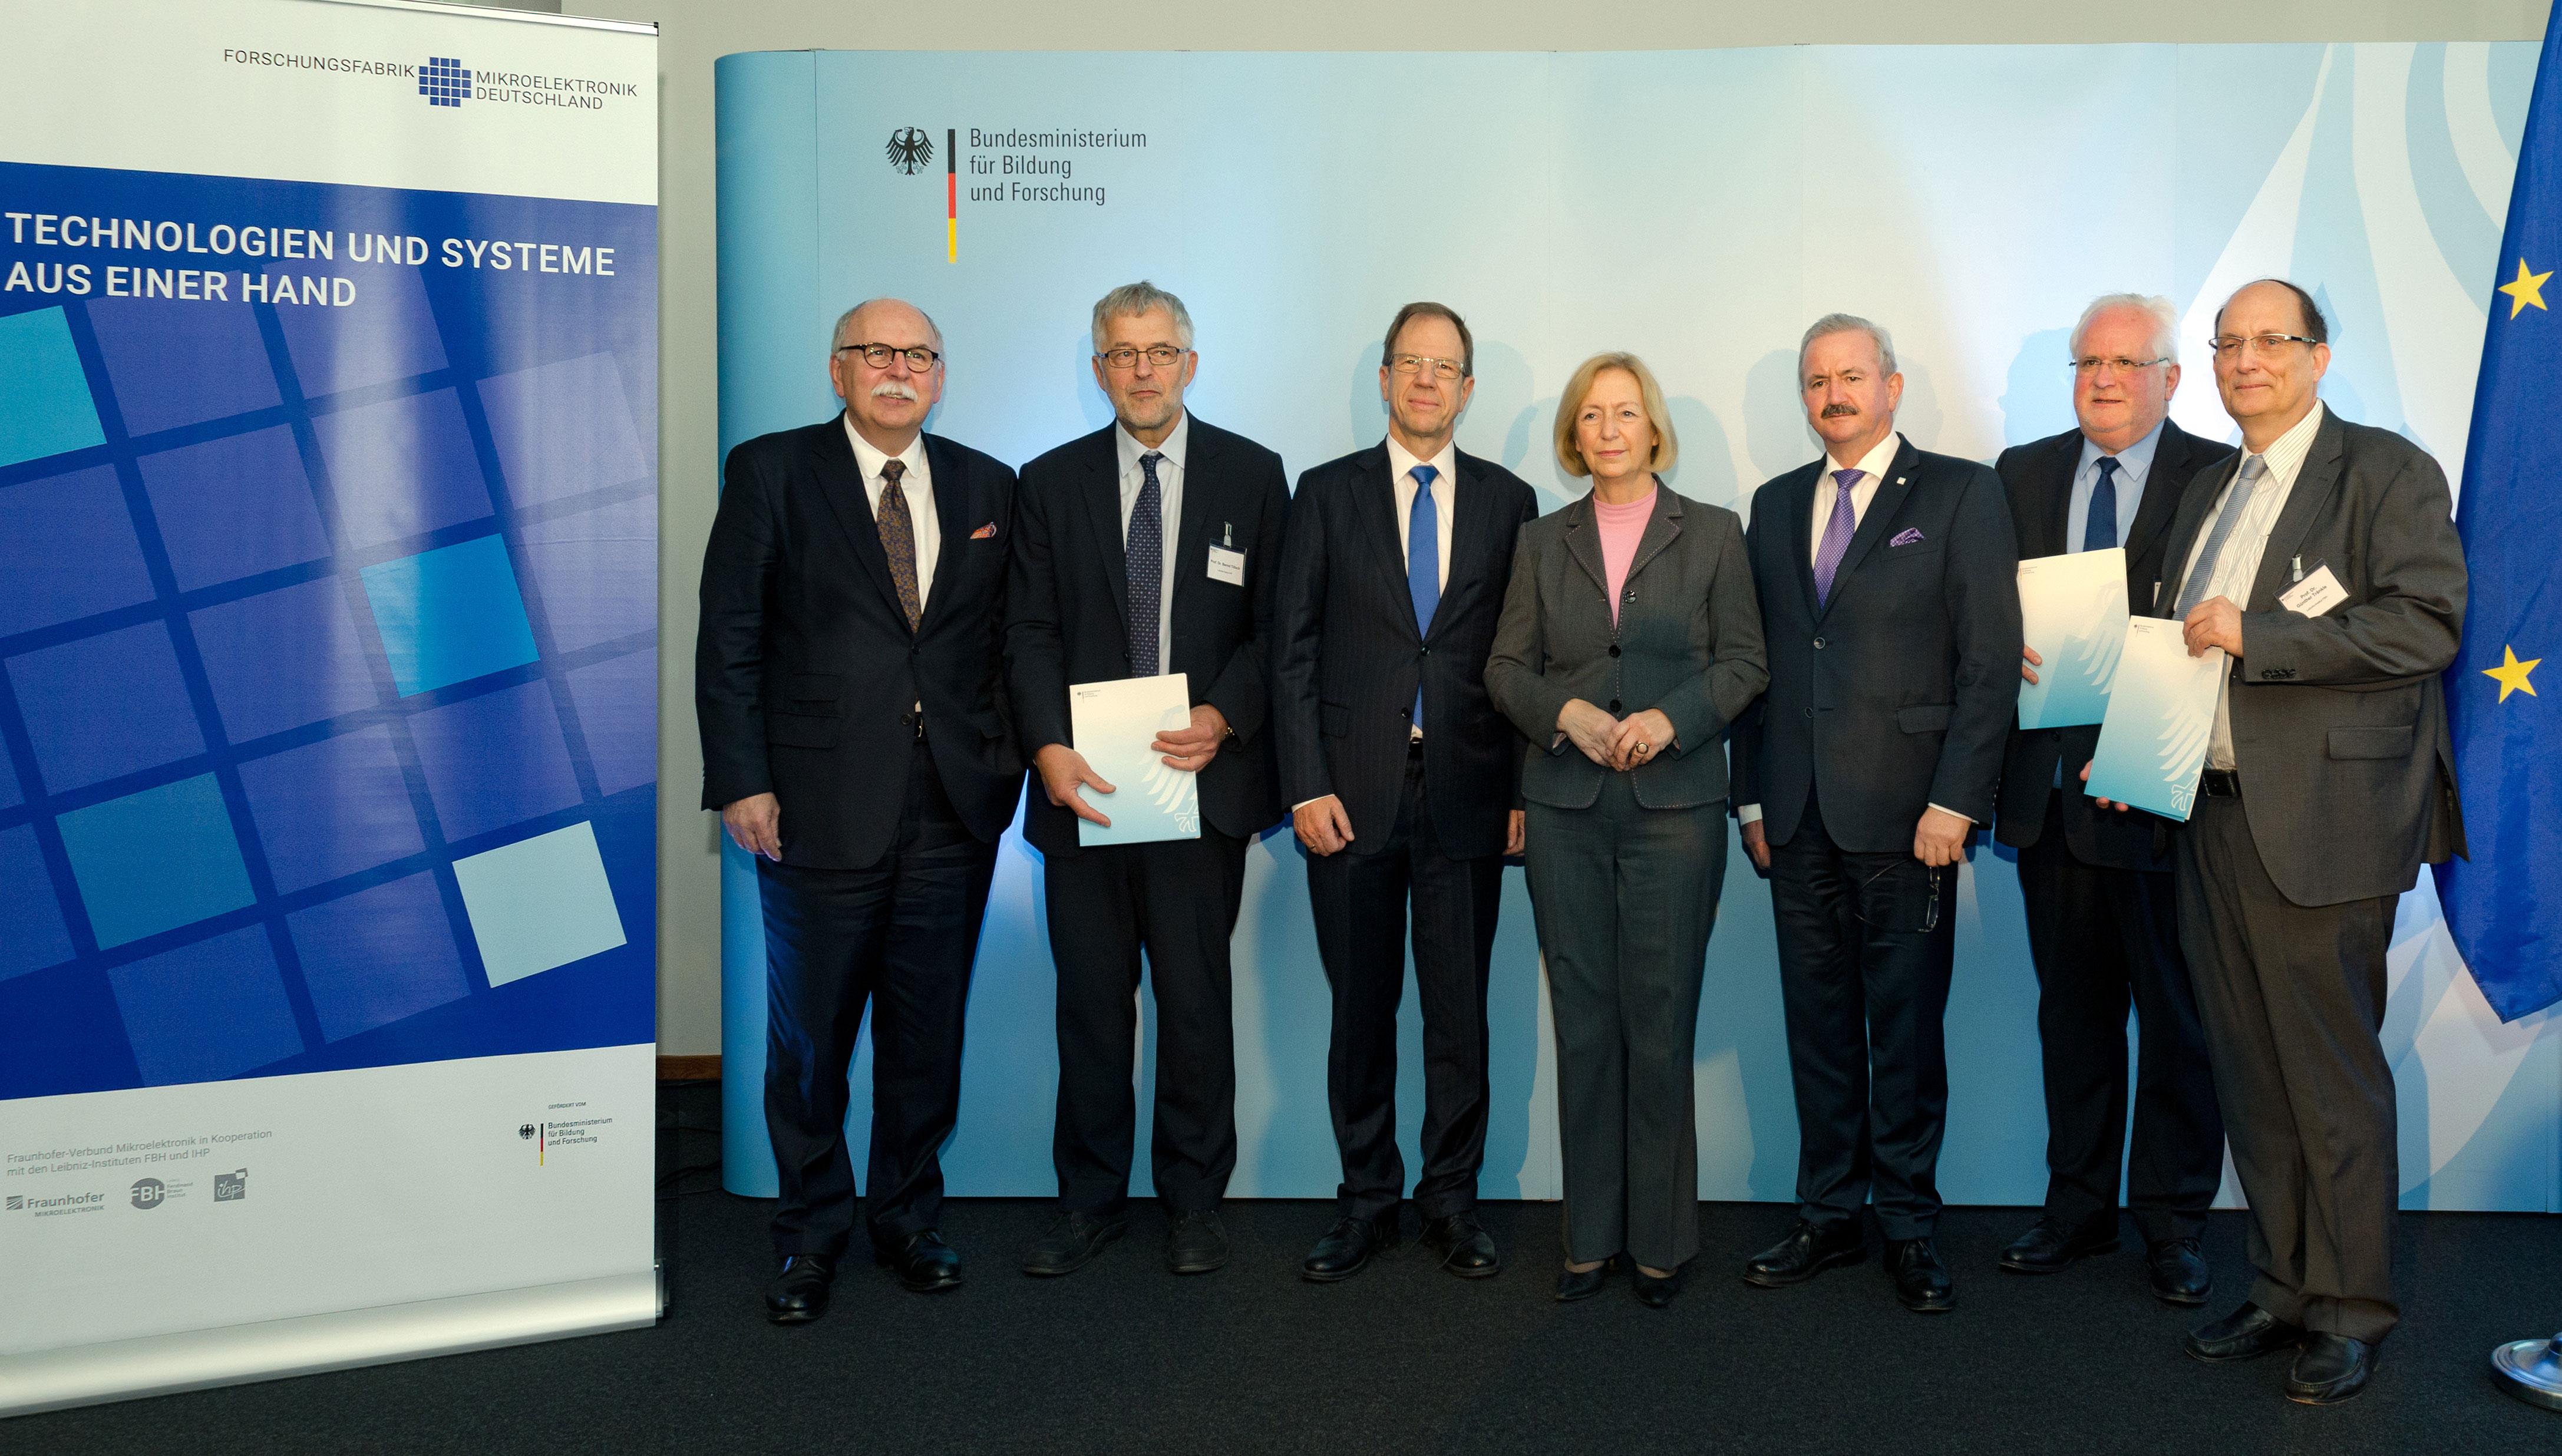 After handing over the grant approvals issued by the Federal Ministry of Education and Research (L-R):  Prof. Matthias Kleiner, President Leibniz Association, Prof. Bernd Tillack, Institute Director Leibniz Institute for Innovations for High Performance Microelectronics (IHP), Dr. Reinhard Ploss, CEO of Infineon AG, Prof. Johanna Wanka, Federal Research Minister, Prof. Reimund Neugebauer, President Fraunhofer-Gesellschaft, Prof. Hubert Lakner, Chairman Fraunhofer Group for Microelectronics, Prof. Günther Tränkle, Institute Director Ferdinand Braun Institute, Leibniz-Institut für Höchstfrequenztechnik (FBH).